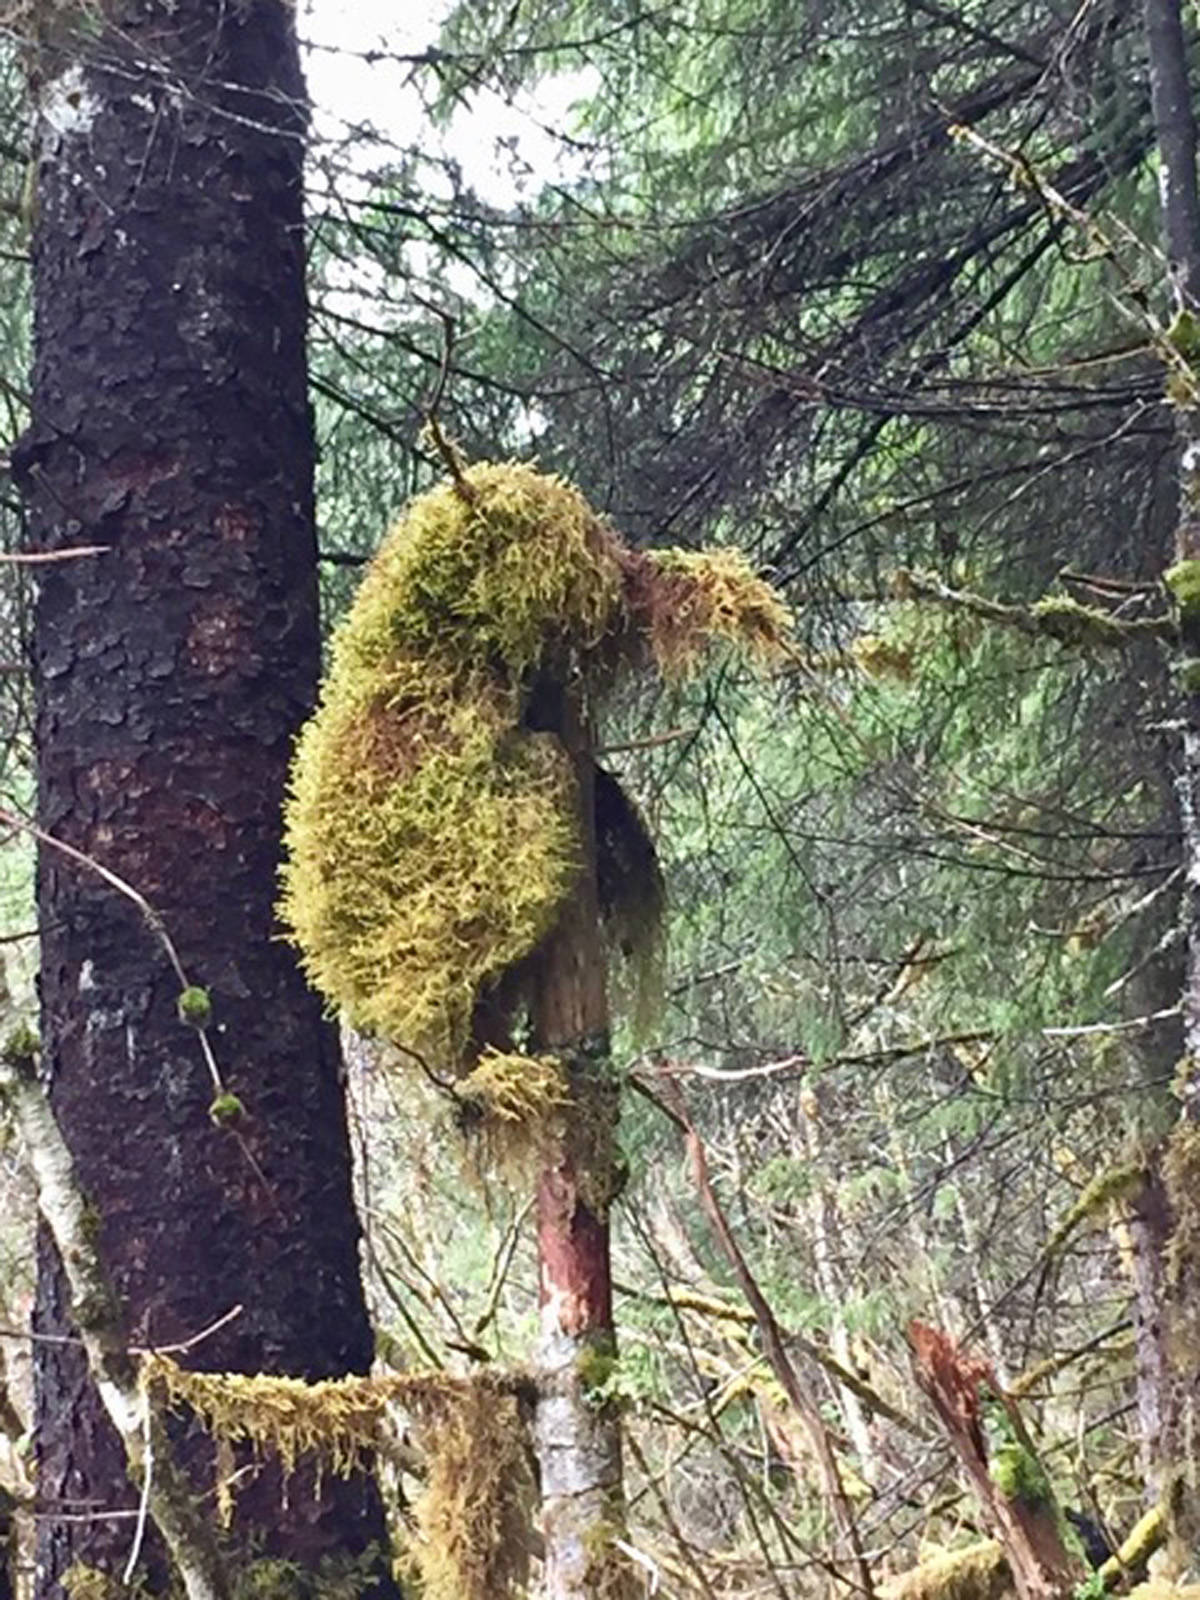 A furry moss-covered character on a stick along Eagle Glacier Cabin Trail on May 3, 2019. (Courtesy Photo | Sandy Williams)